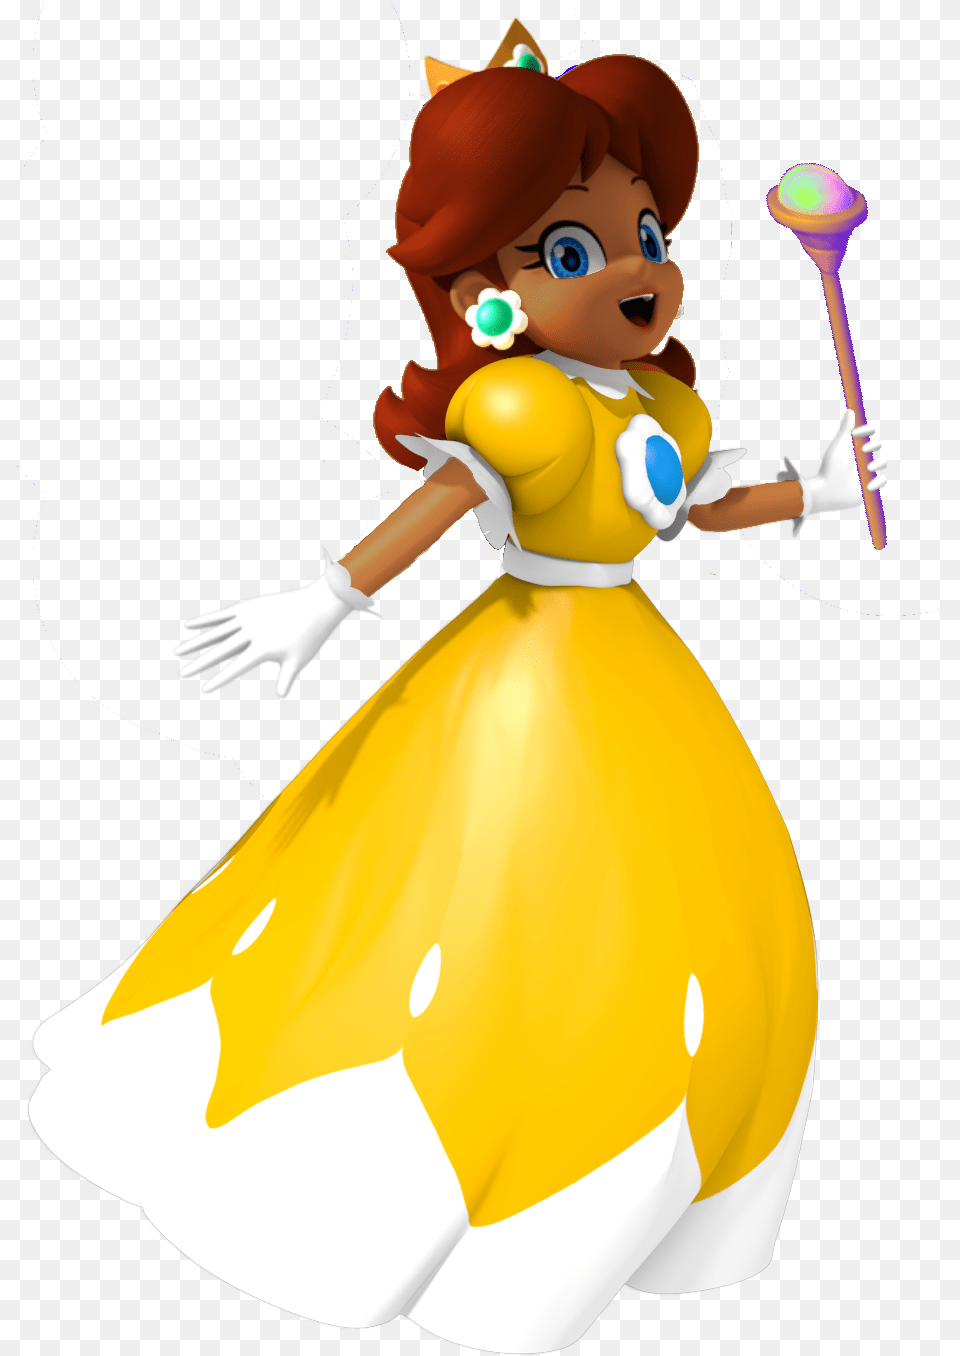 Princess Daisy And The Daisy Mario, Baby, Person Png Image